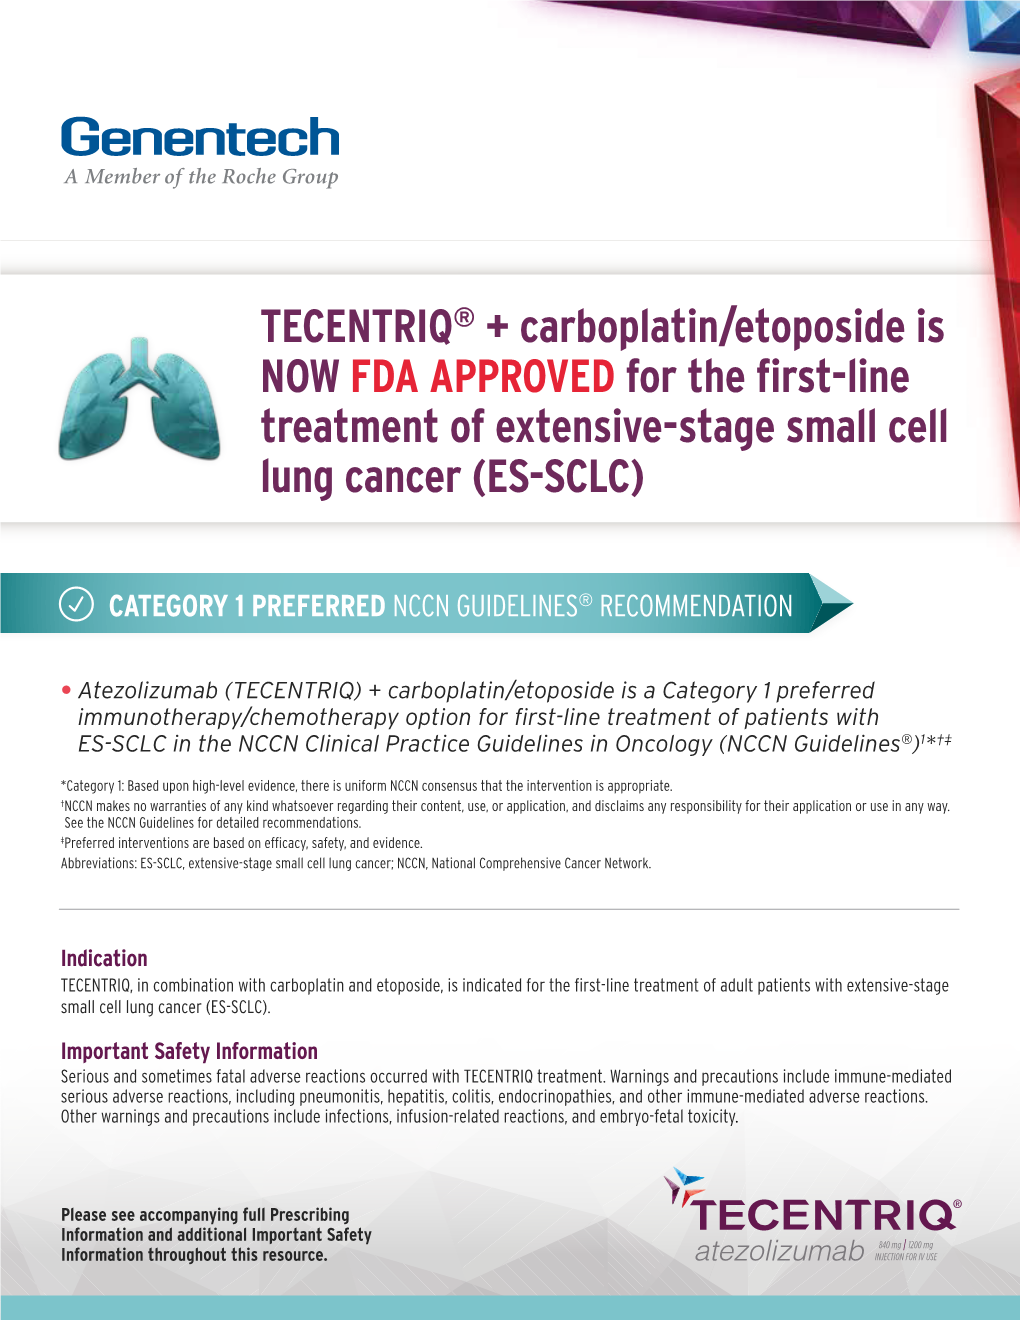 TECENTRIQ® + Carboplatin/Etoposide Is NOW FDA APPROVED for the First-Line Treatment of Extensive-Stage Small Cell Lung Cancer (ES-SCLC)